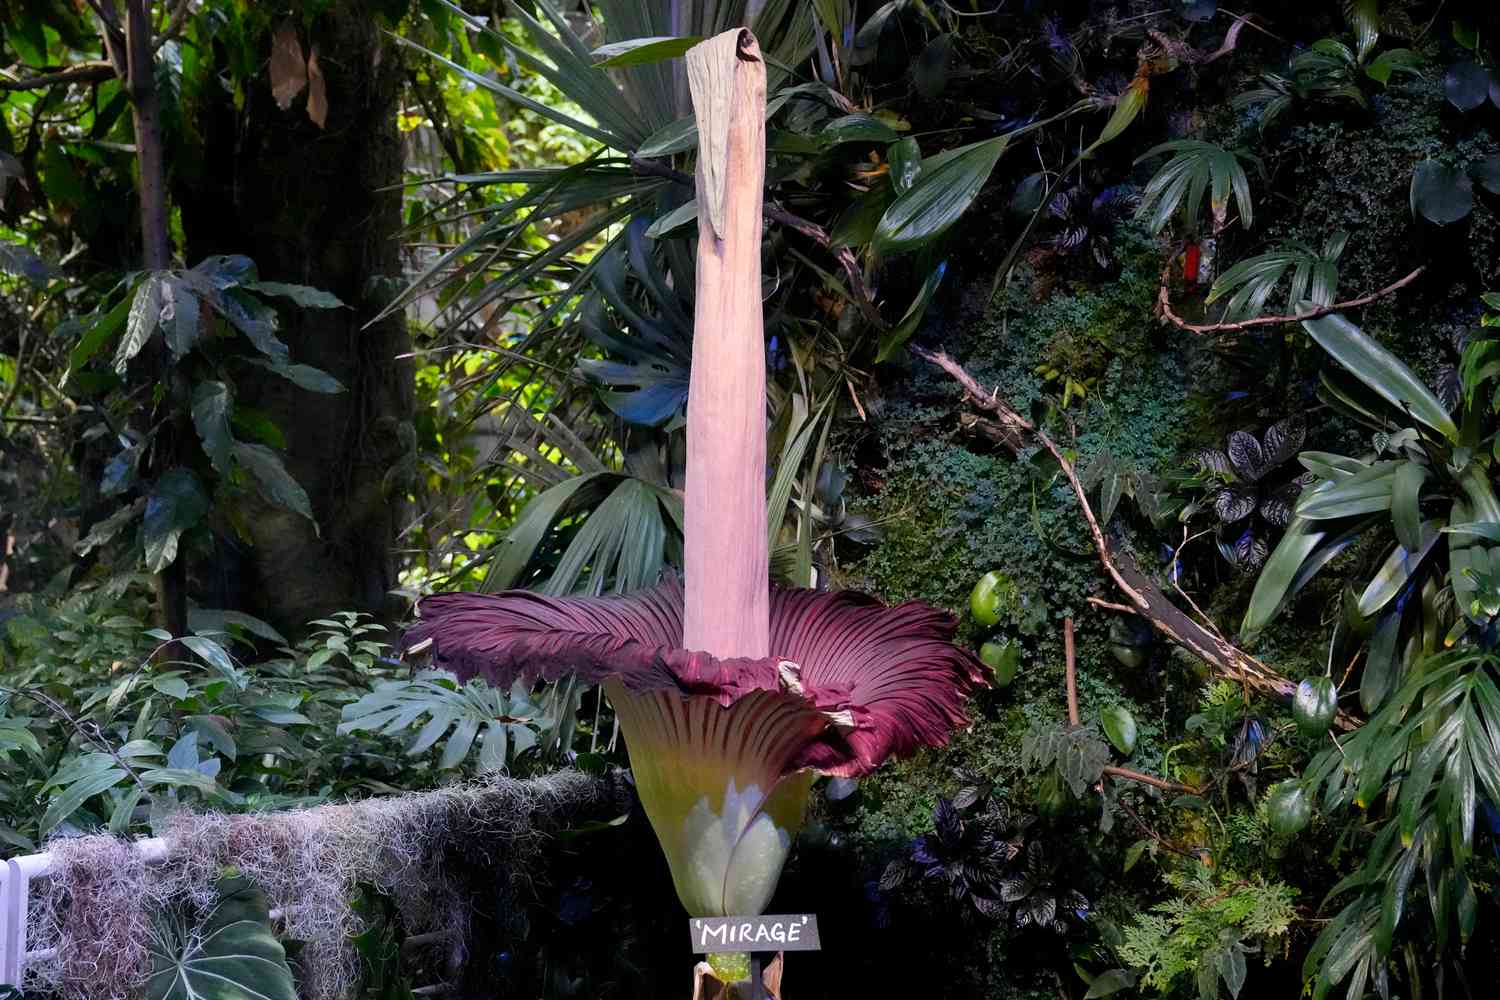  Hundreds Line Up in San Francisco to See 7-Foot Tall Corpse Flower That Smells 'Like a Porta Potty' 